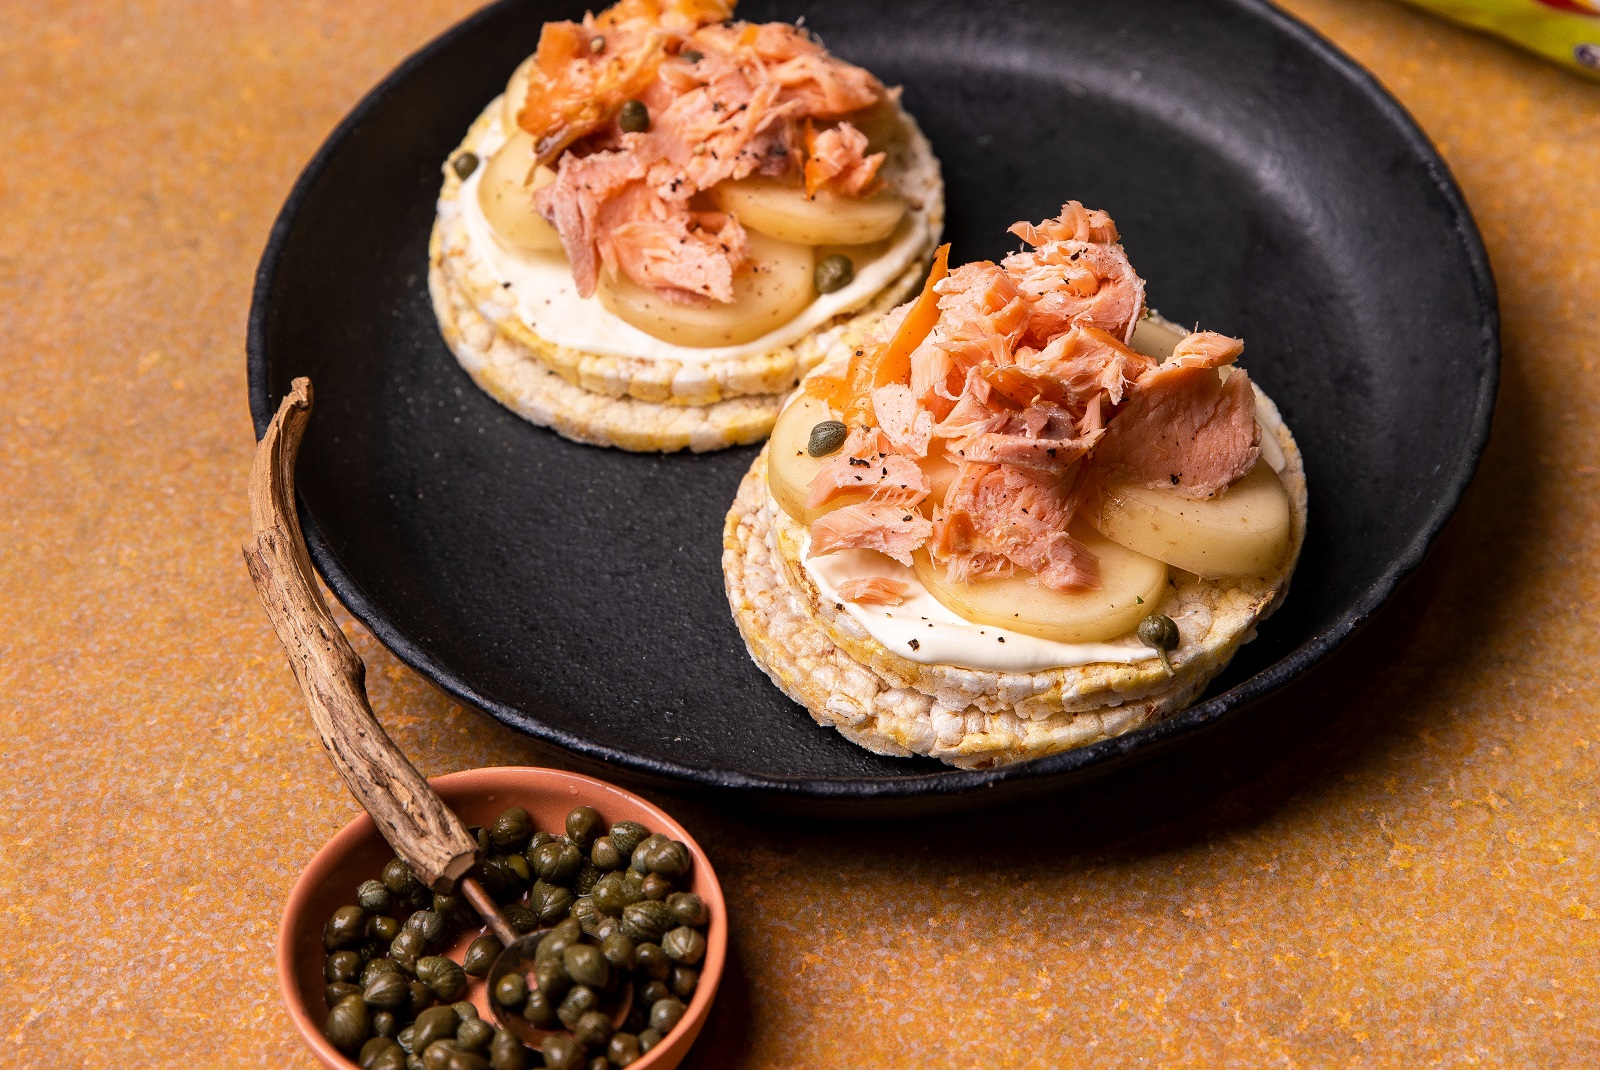 Sour Cream, Boiled Potatoes, Smoked Salmon & Capers on Corn Thins slices for dinner